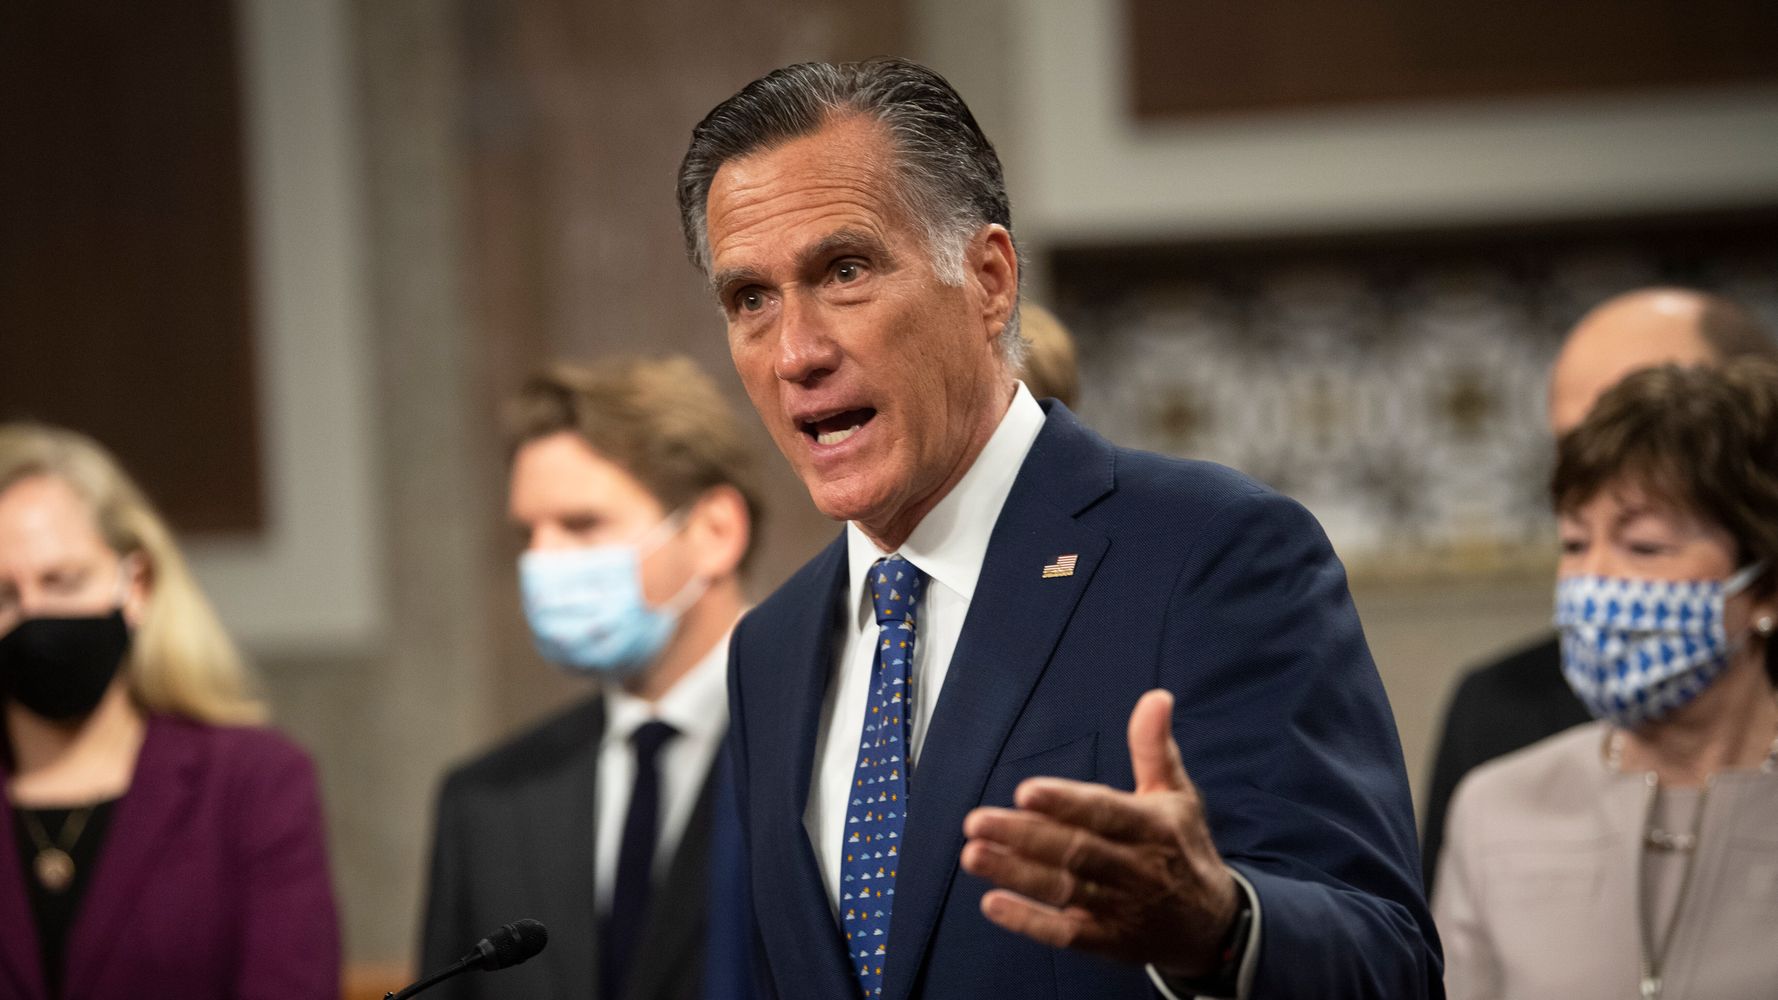 Mitt Romney Succinctly Sums Up Need For COVID-19 Relief: 'This Is A Crisis'